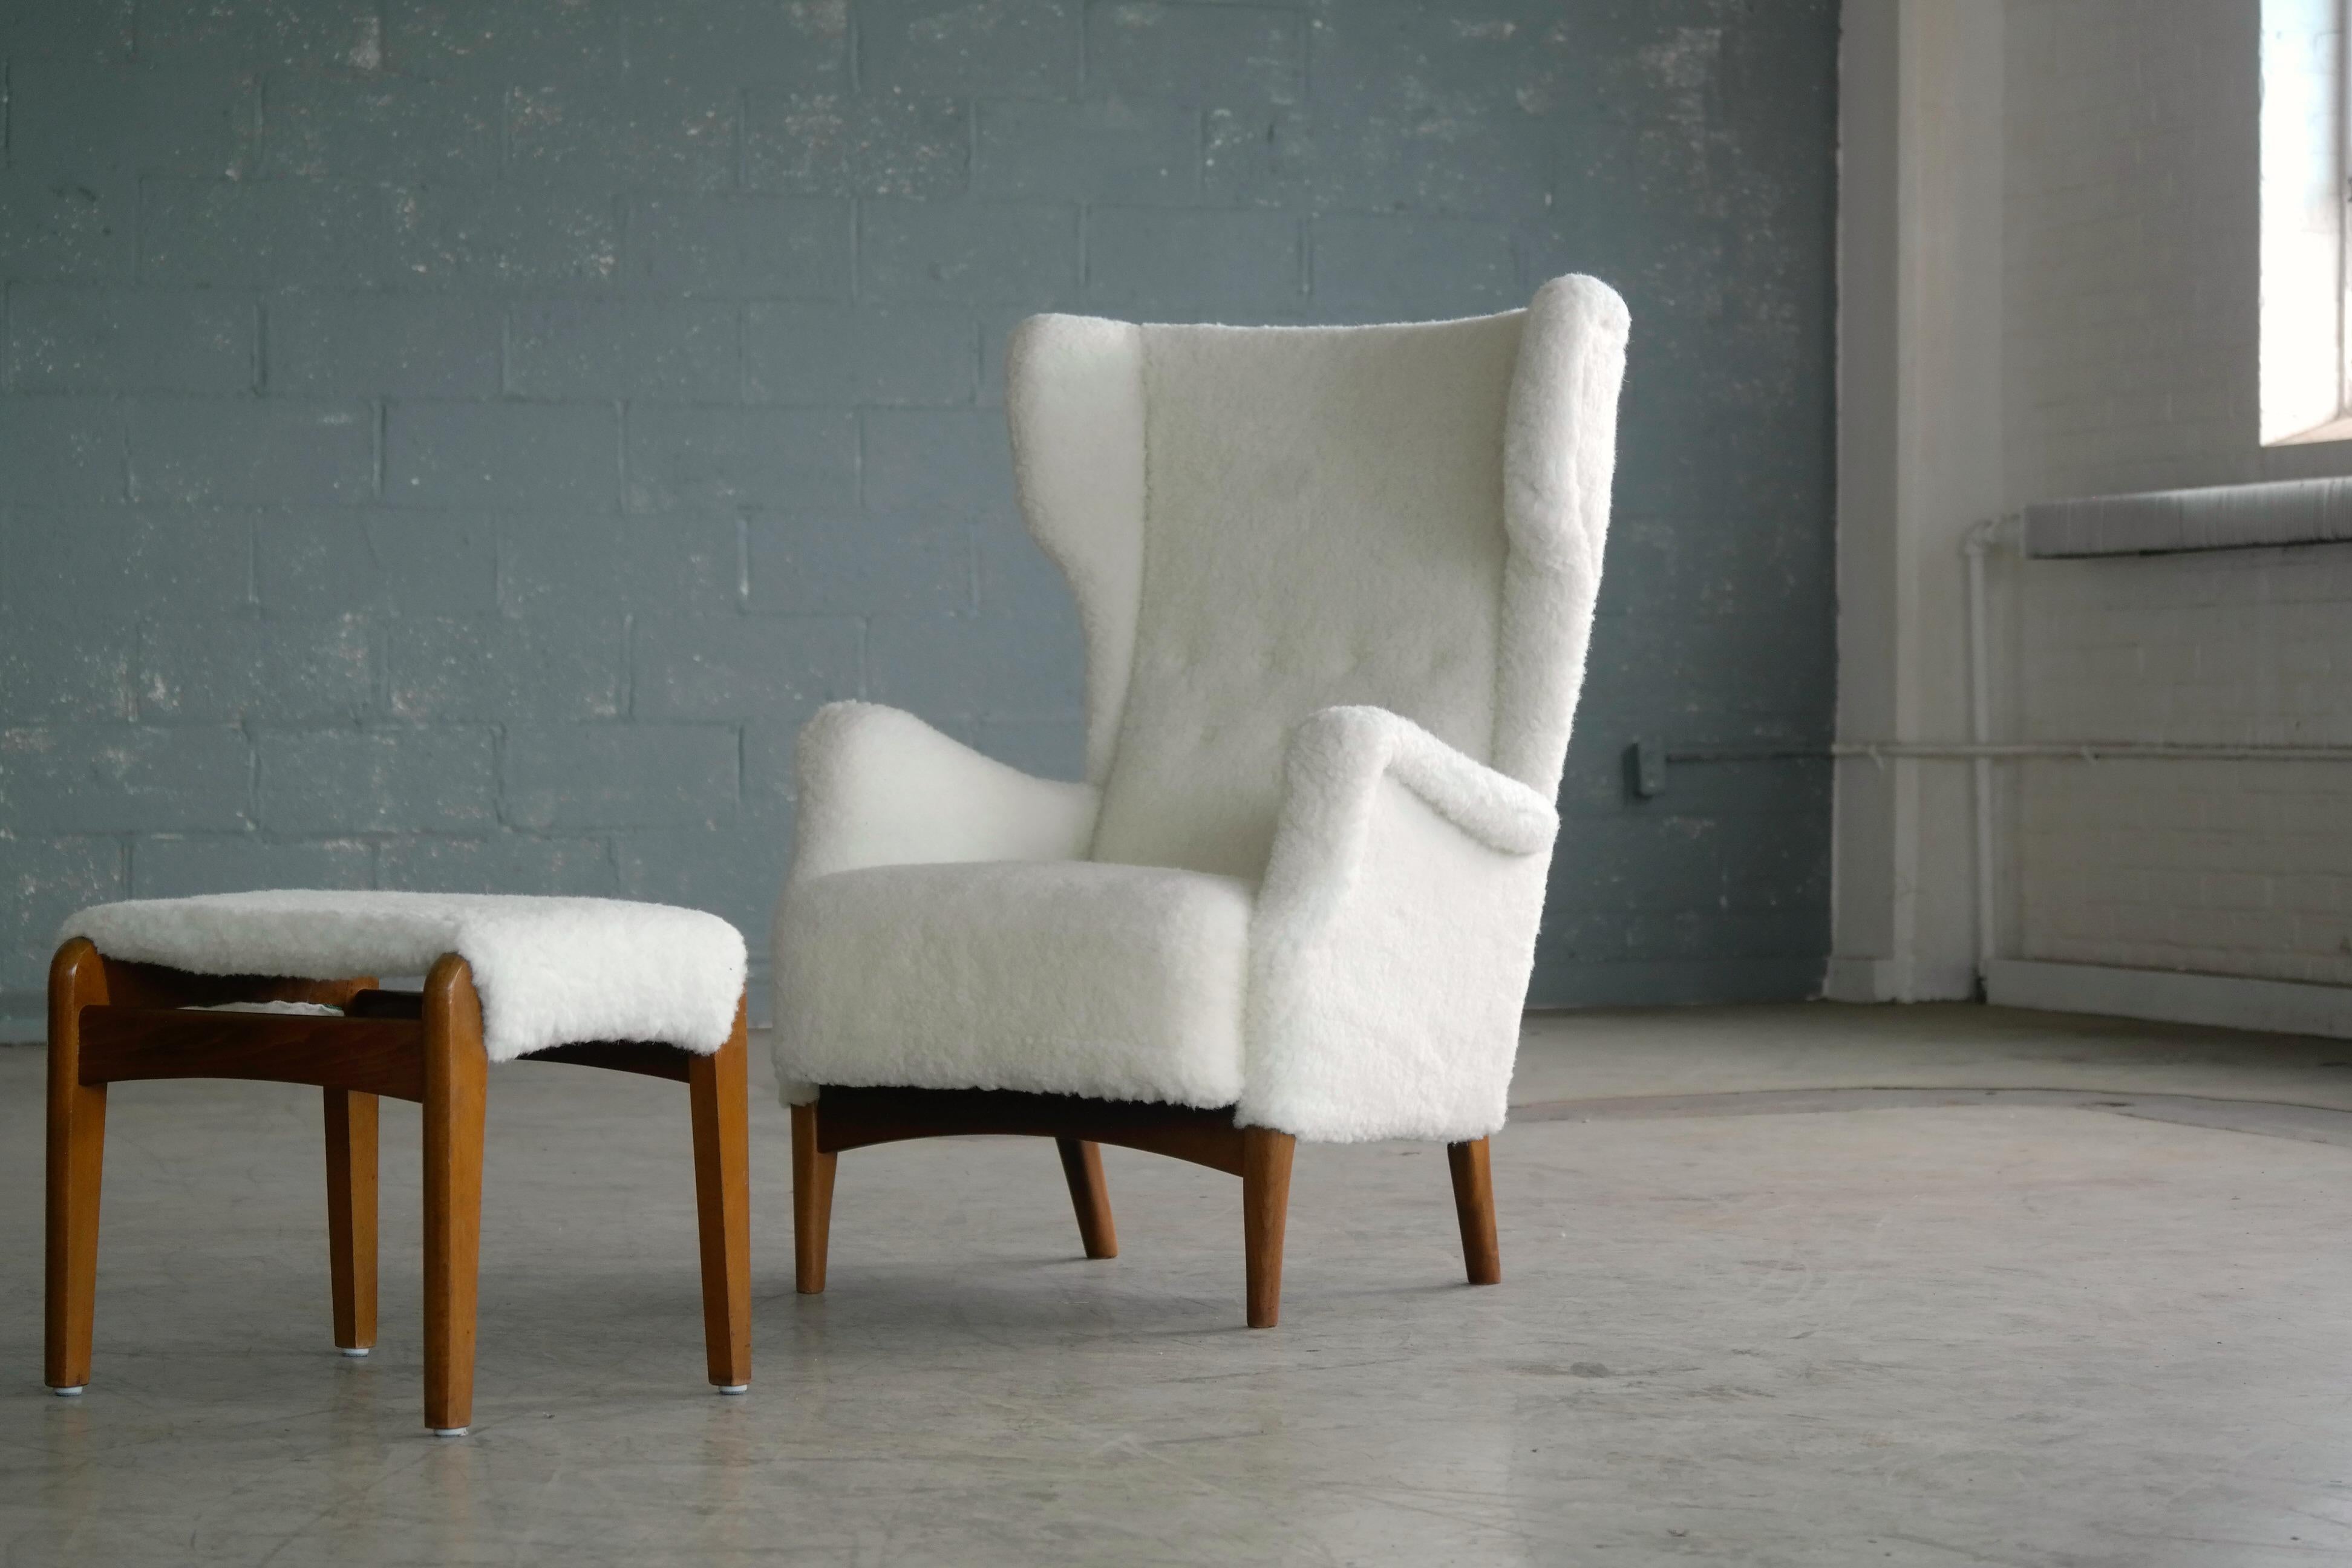 Fantastic Danish midcentury wingback chair model 8023 designed and first seen in Fritz Hansen's 1951 catalog. The matching ottoman is a model 1164 by Fritz Hansen and both pieces were made at Fritz Hansen factory in Denmark in the early 1950s. Very